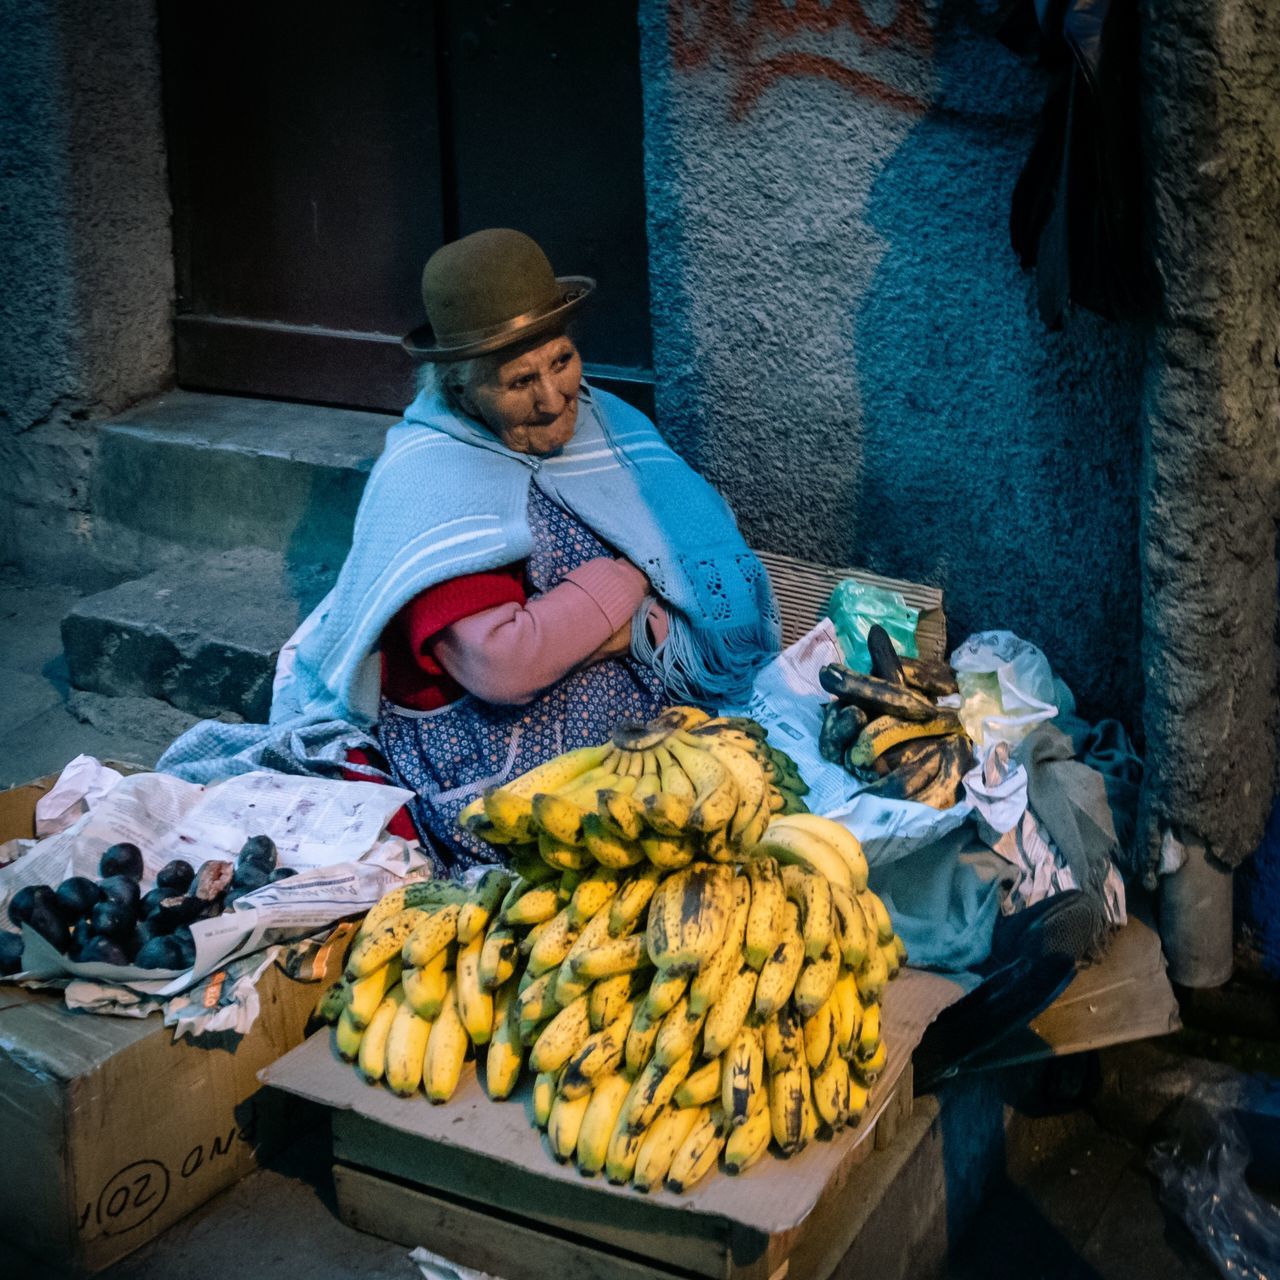 one person, food and drink, food, healthy eating, real people, market, sitting, market stall, fruit, hat, choice, wellbeing, freshness, selling, retail, banana, clothing, variation, for sale, retail display